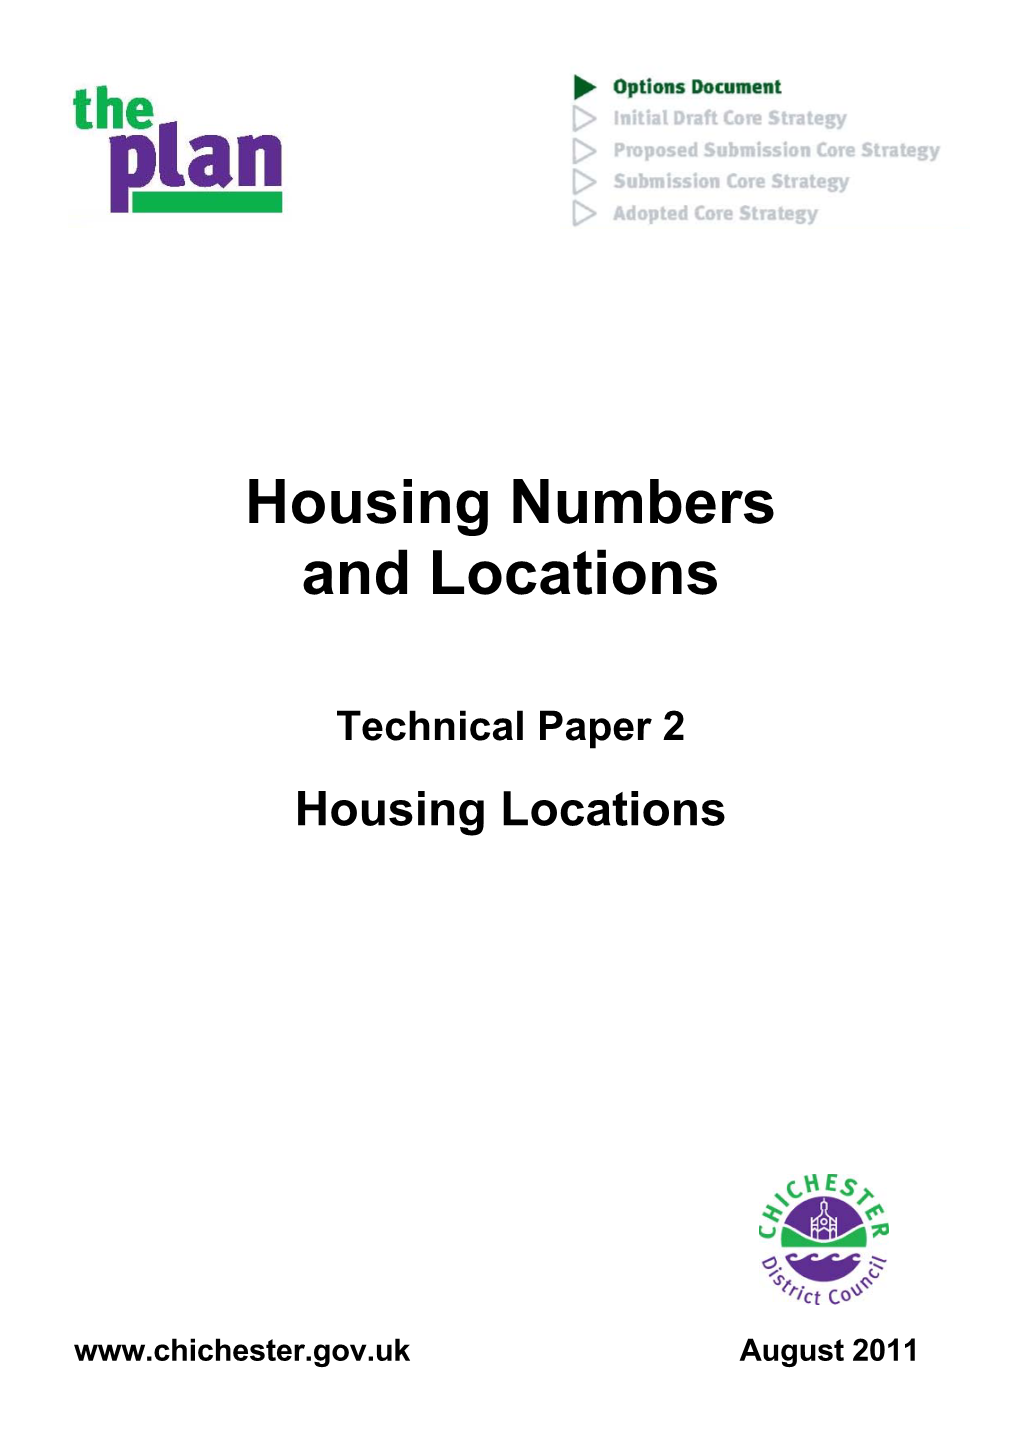 Housing Numbers and Locations